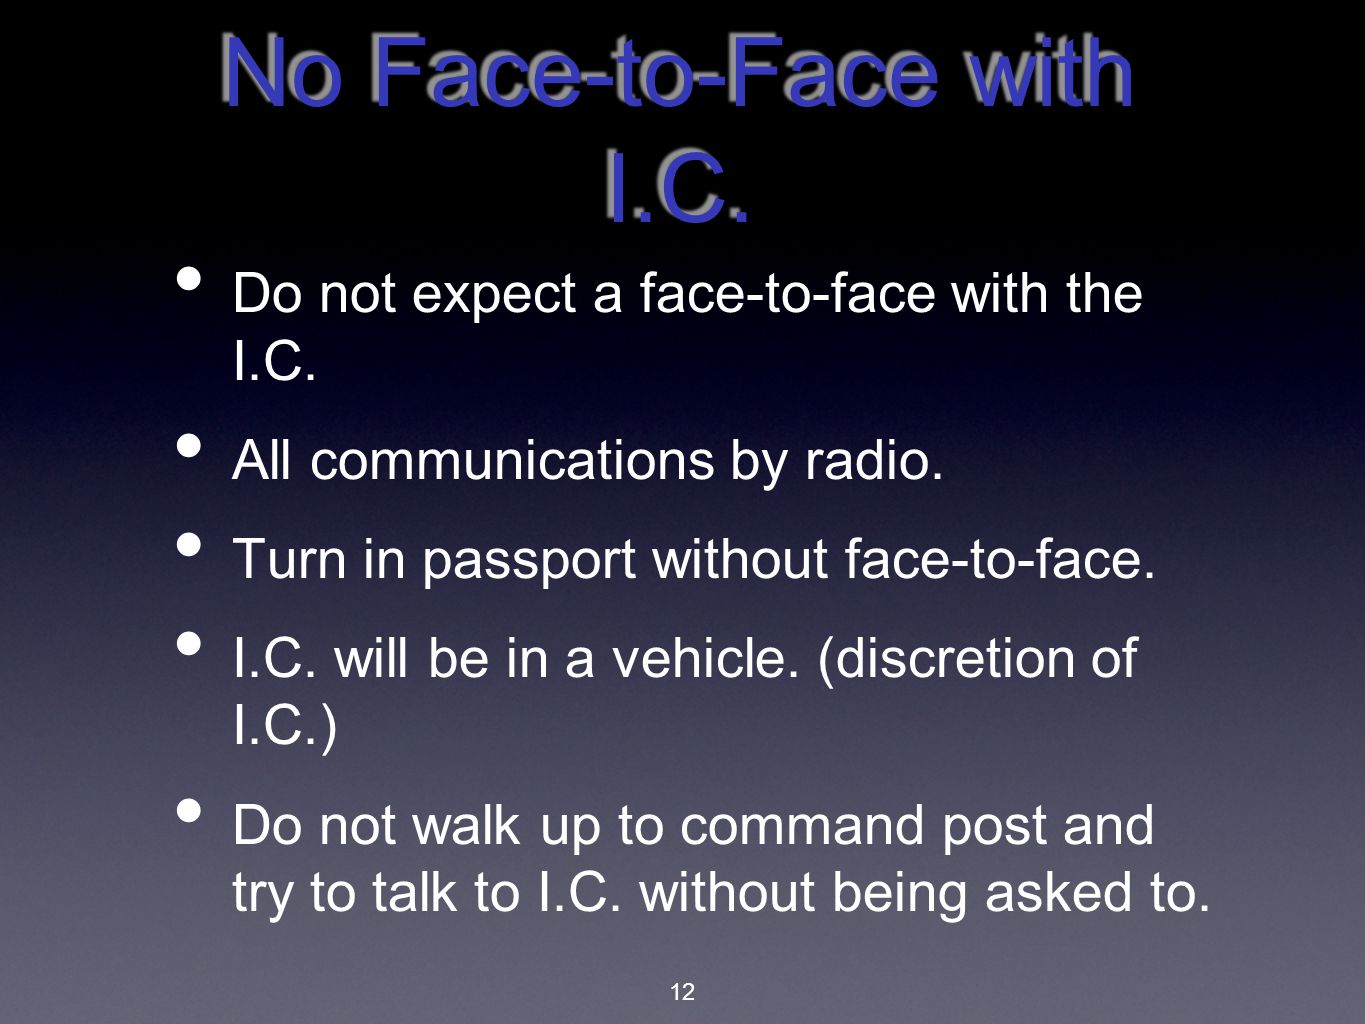 No Face-to-Face with I.C.